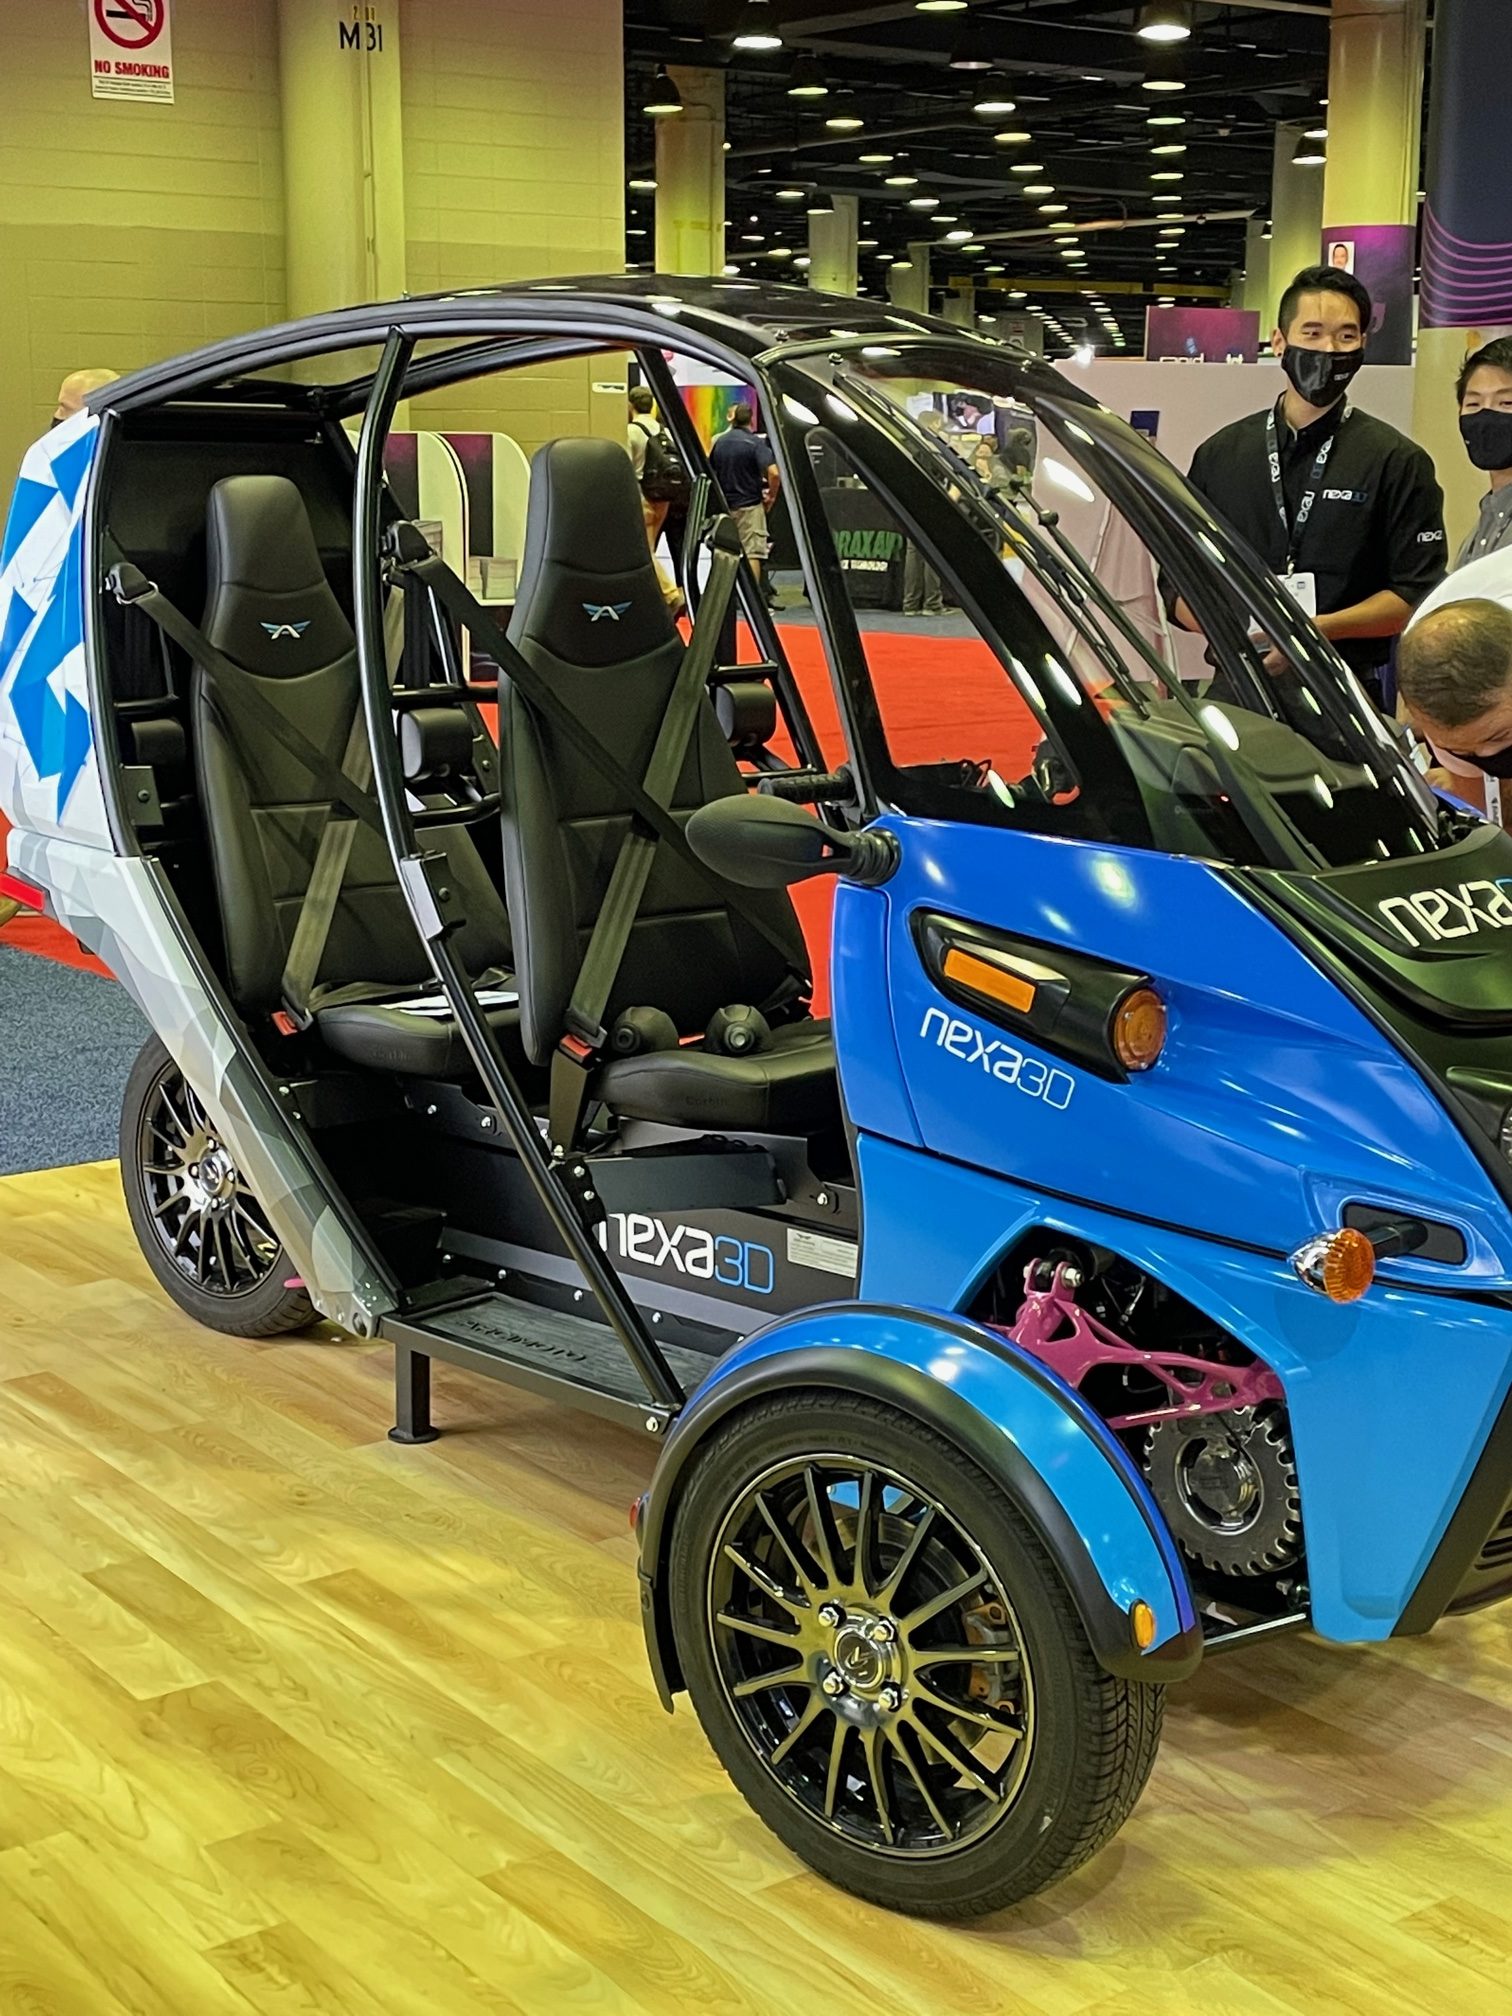 The Fun Utility Vehicle (FUV) project by Nexa3D and Arcimoto